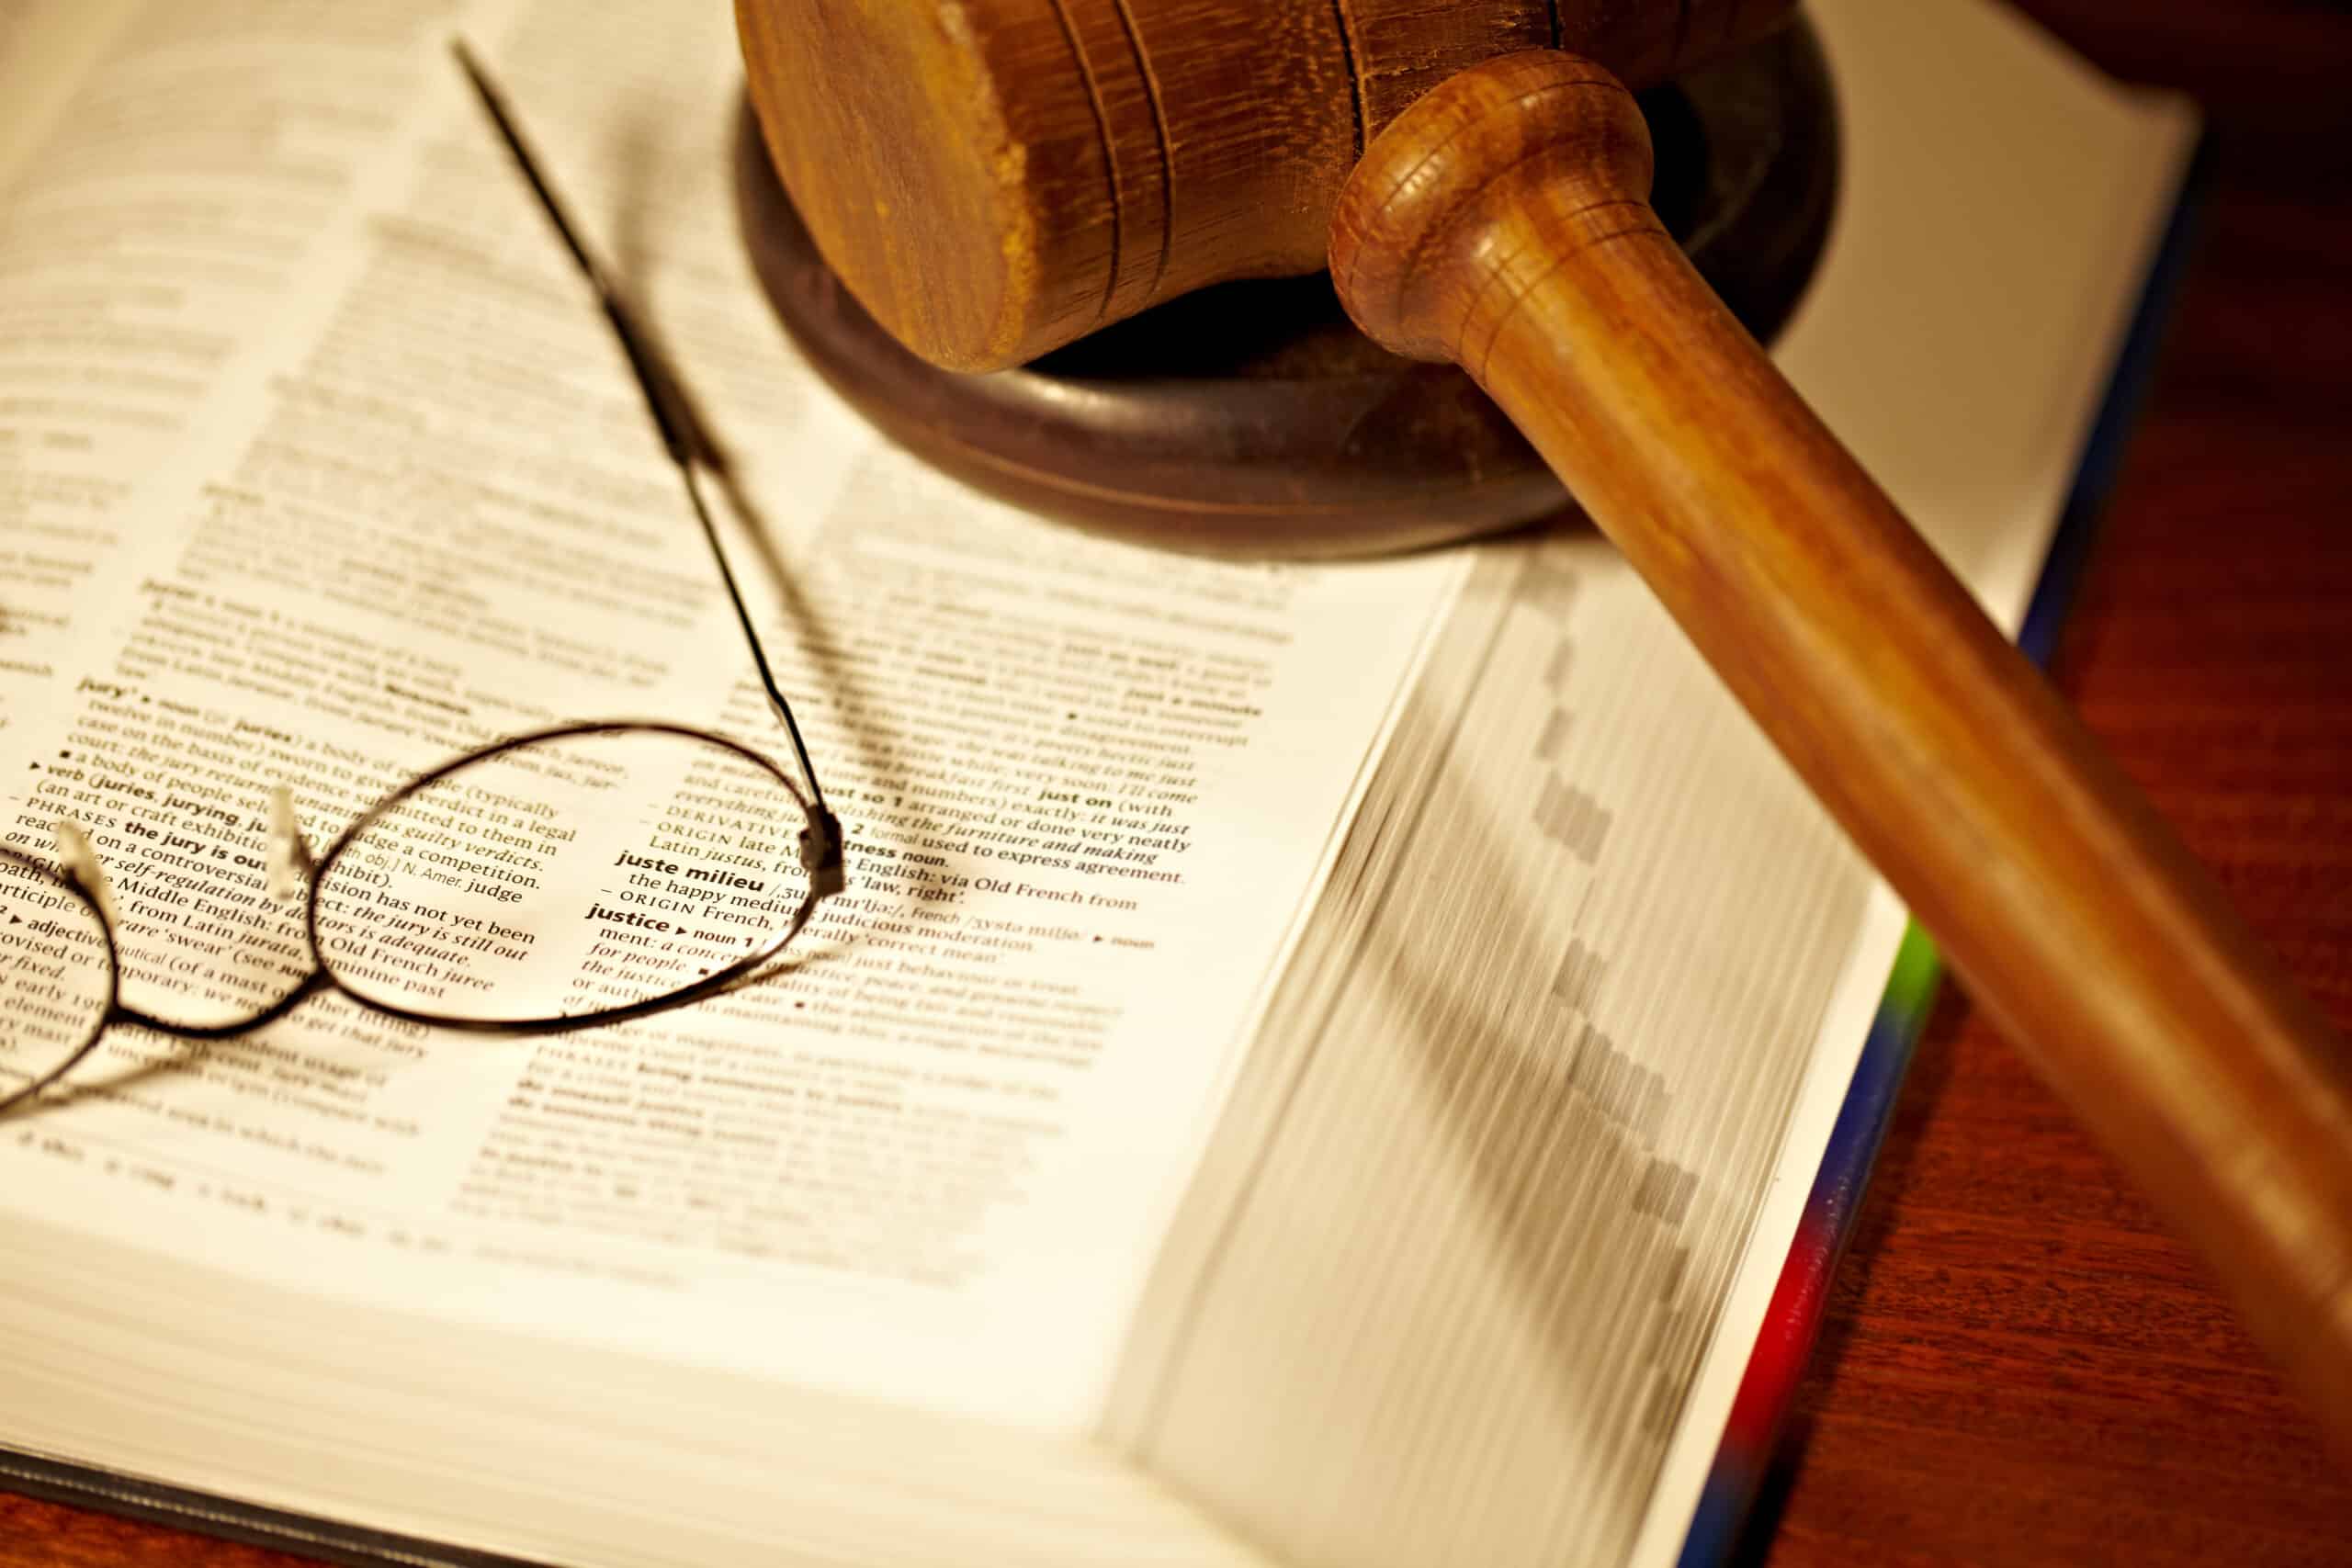 https://filkowlaw.com/wp-content/uploads/2023/05/the-meaning-of-justice-an-open-book-with-a-gavel-2022-12-24-03-49-42-utc-scaled.jpg